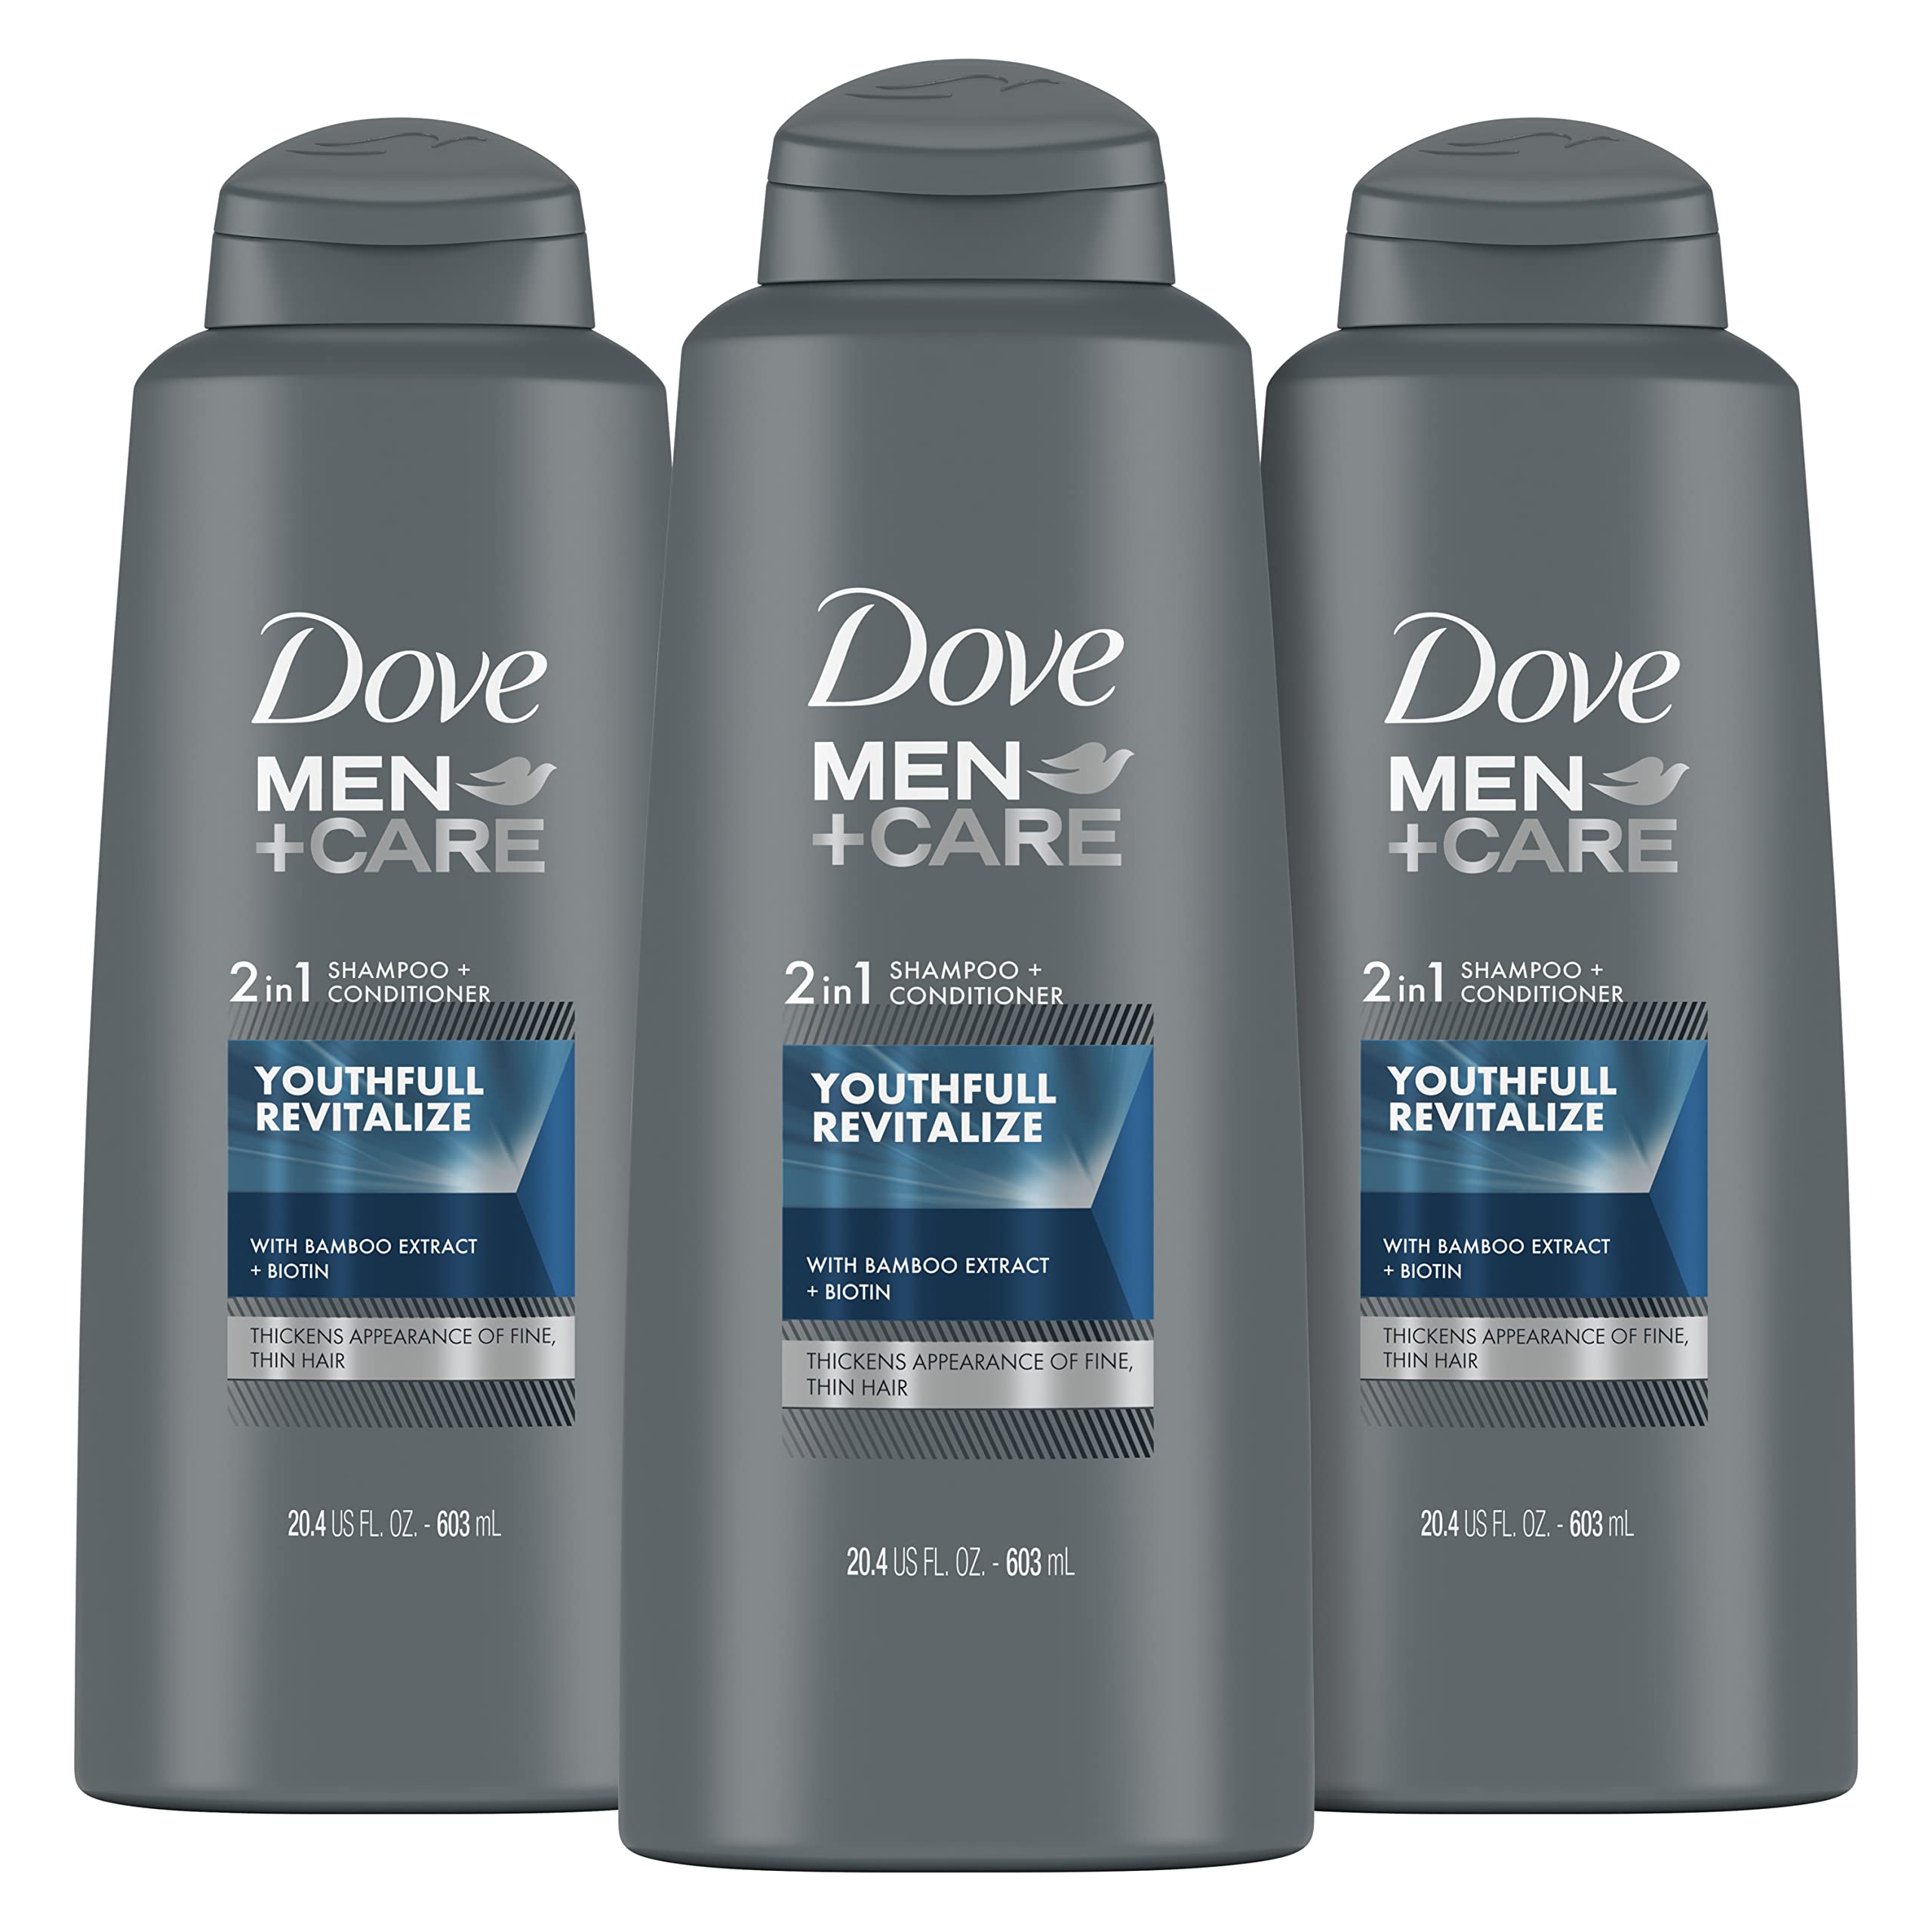 Dove Men+Care 2 in 1 Shampoo and Conditioner Youthfull Revitalize 3 Count For Fine, Thin Hair Men's Shampoo and Conditioner with Bamboo Extract + Biotin 20.4 oz